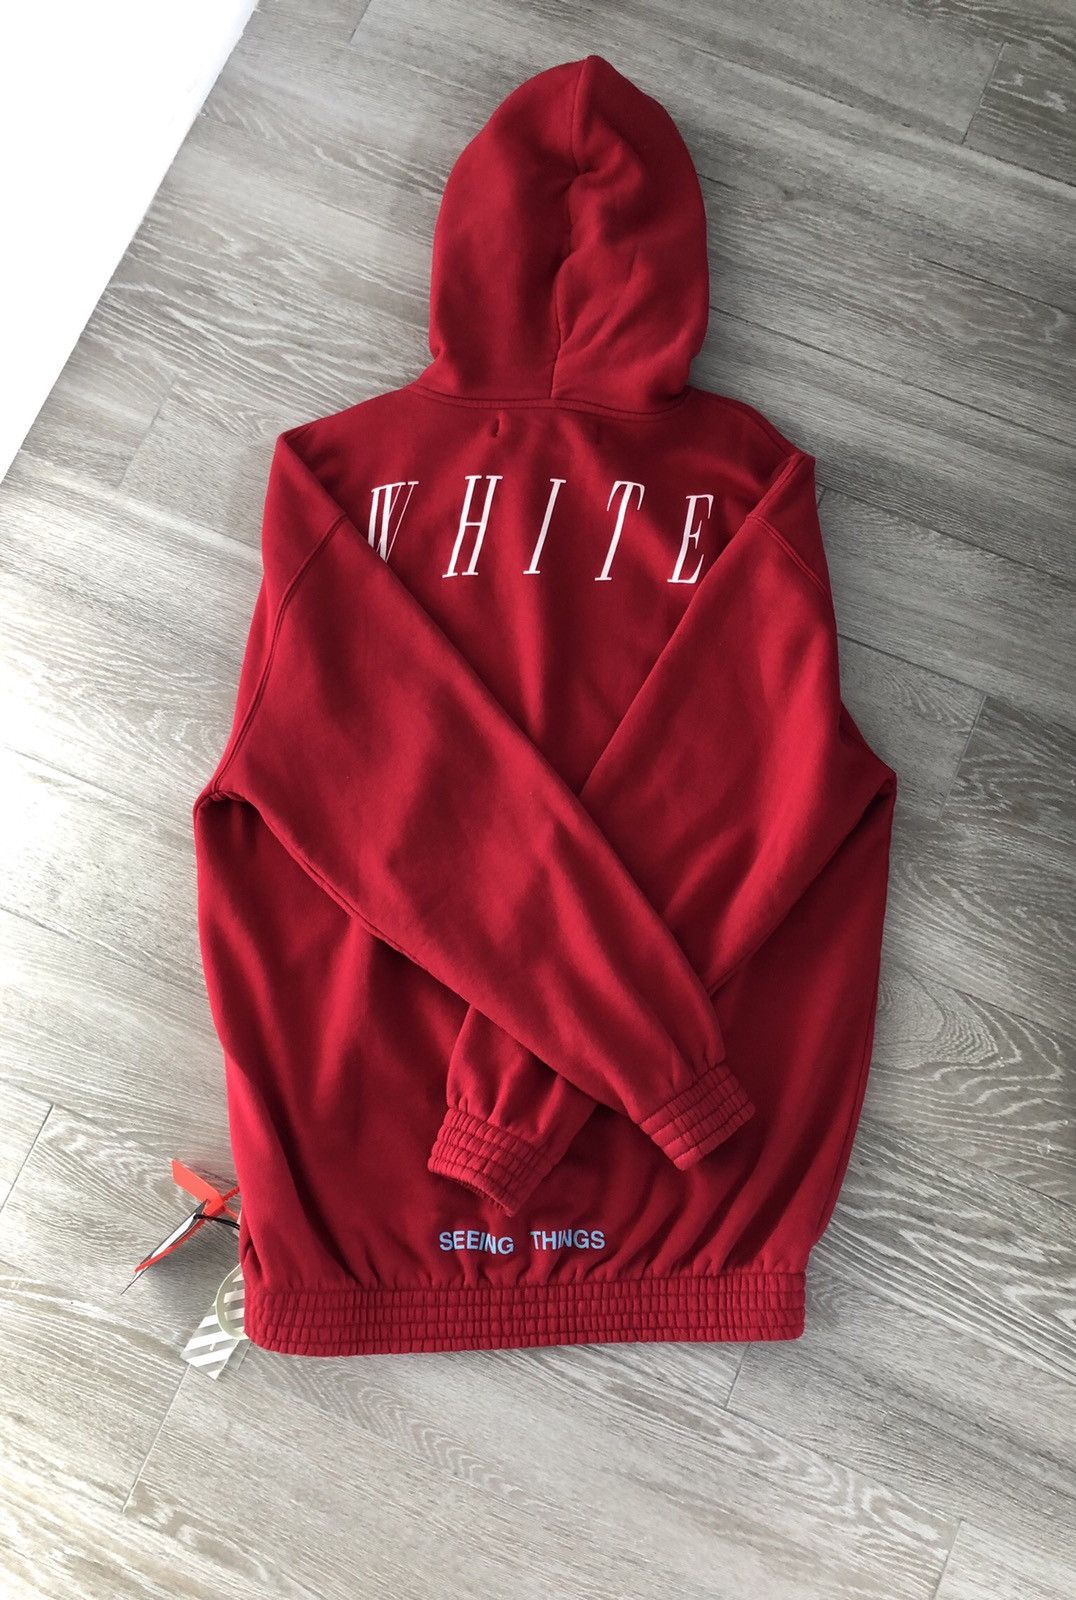 Off-White Off-White “SEEING THINGS” hoodie Size US M / EU 48-50 / 2 - 2 Preview